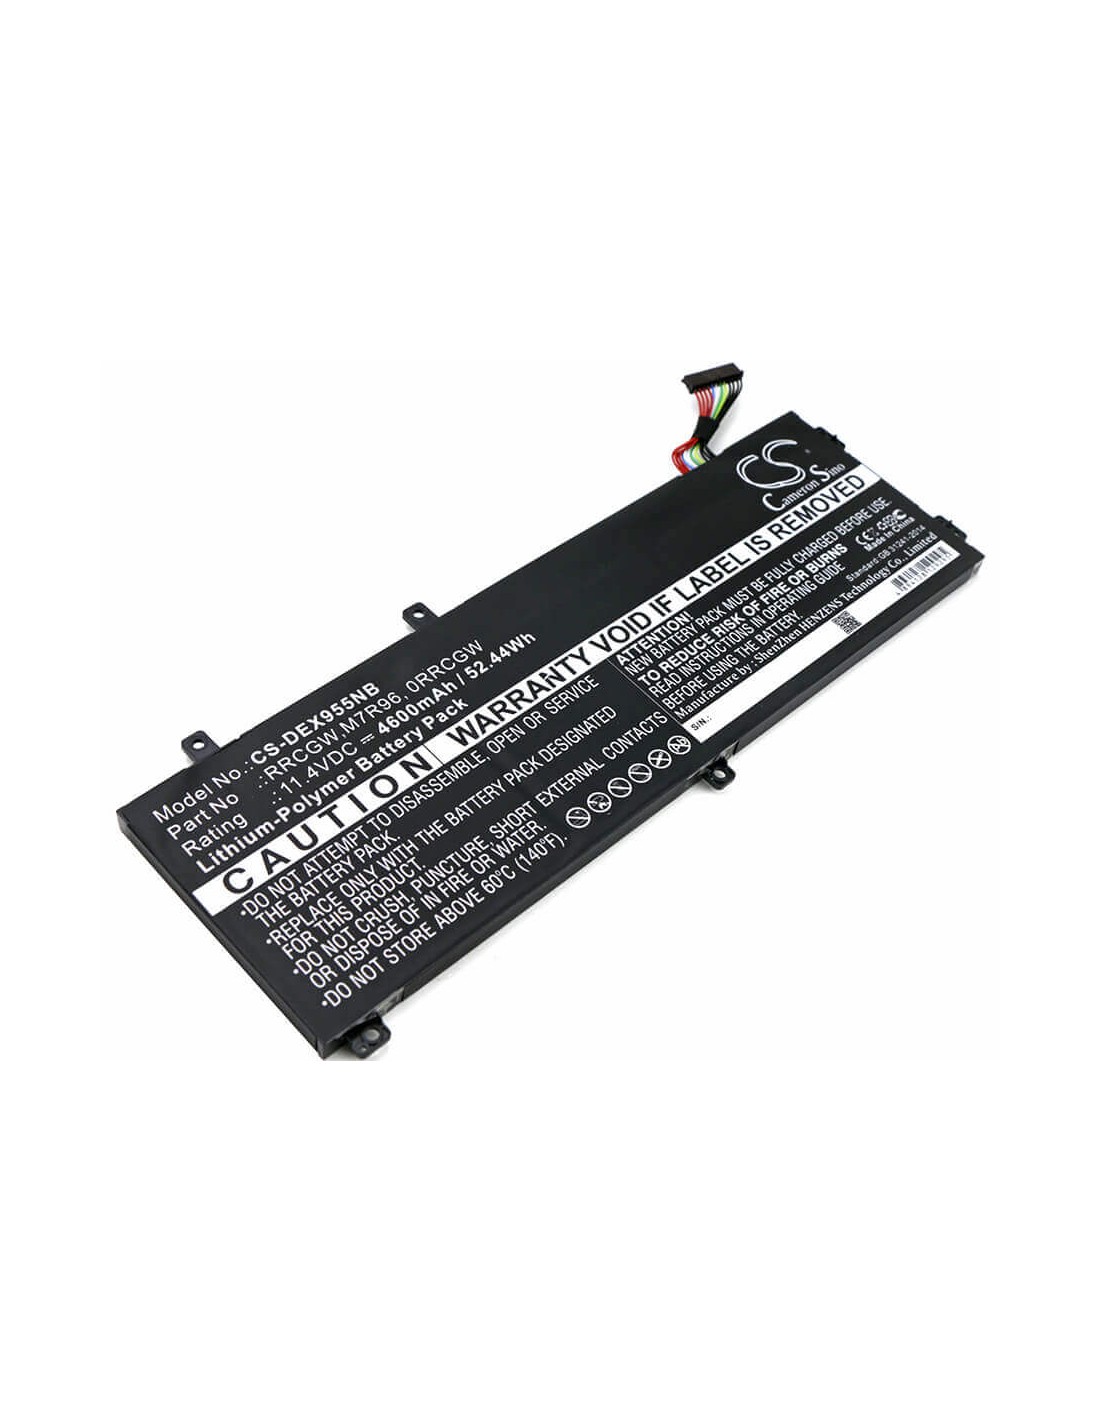 Battery for Dell Xps 15 9550, Precision 15 5510 11.4V, 4600mAh - 52.44Wh